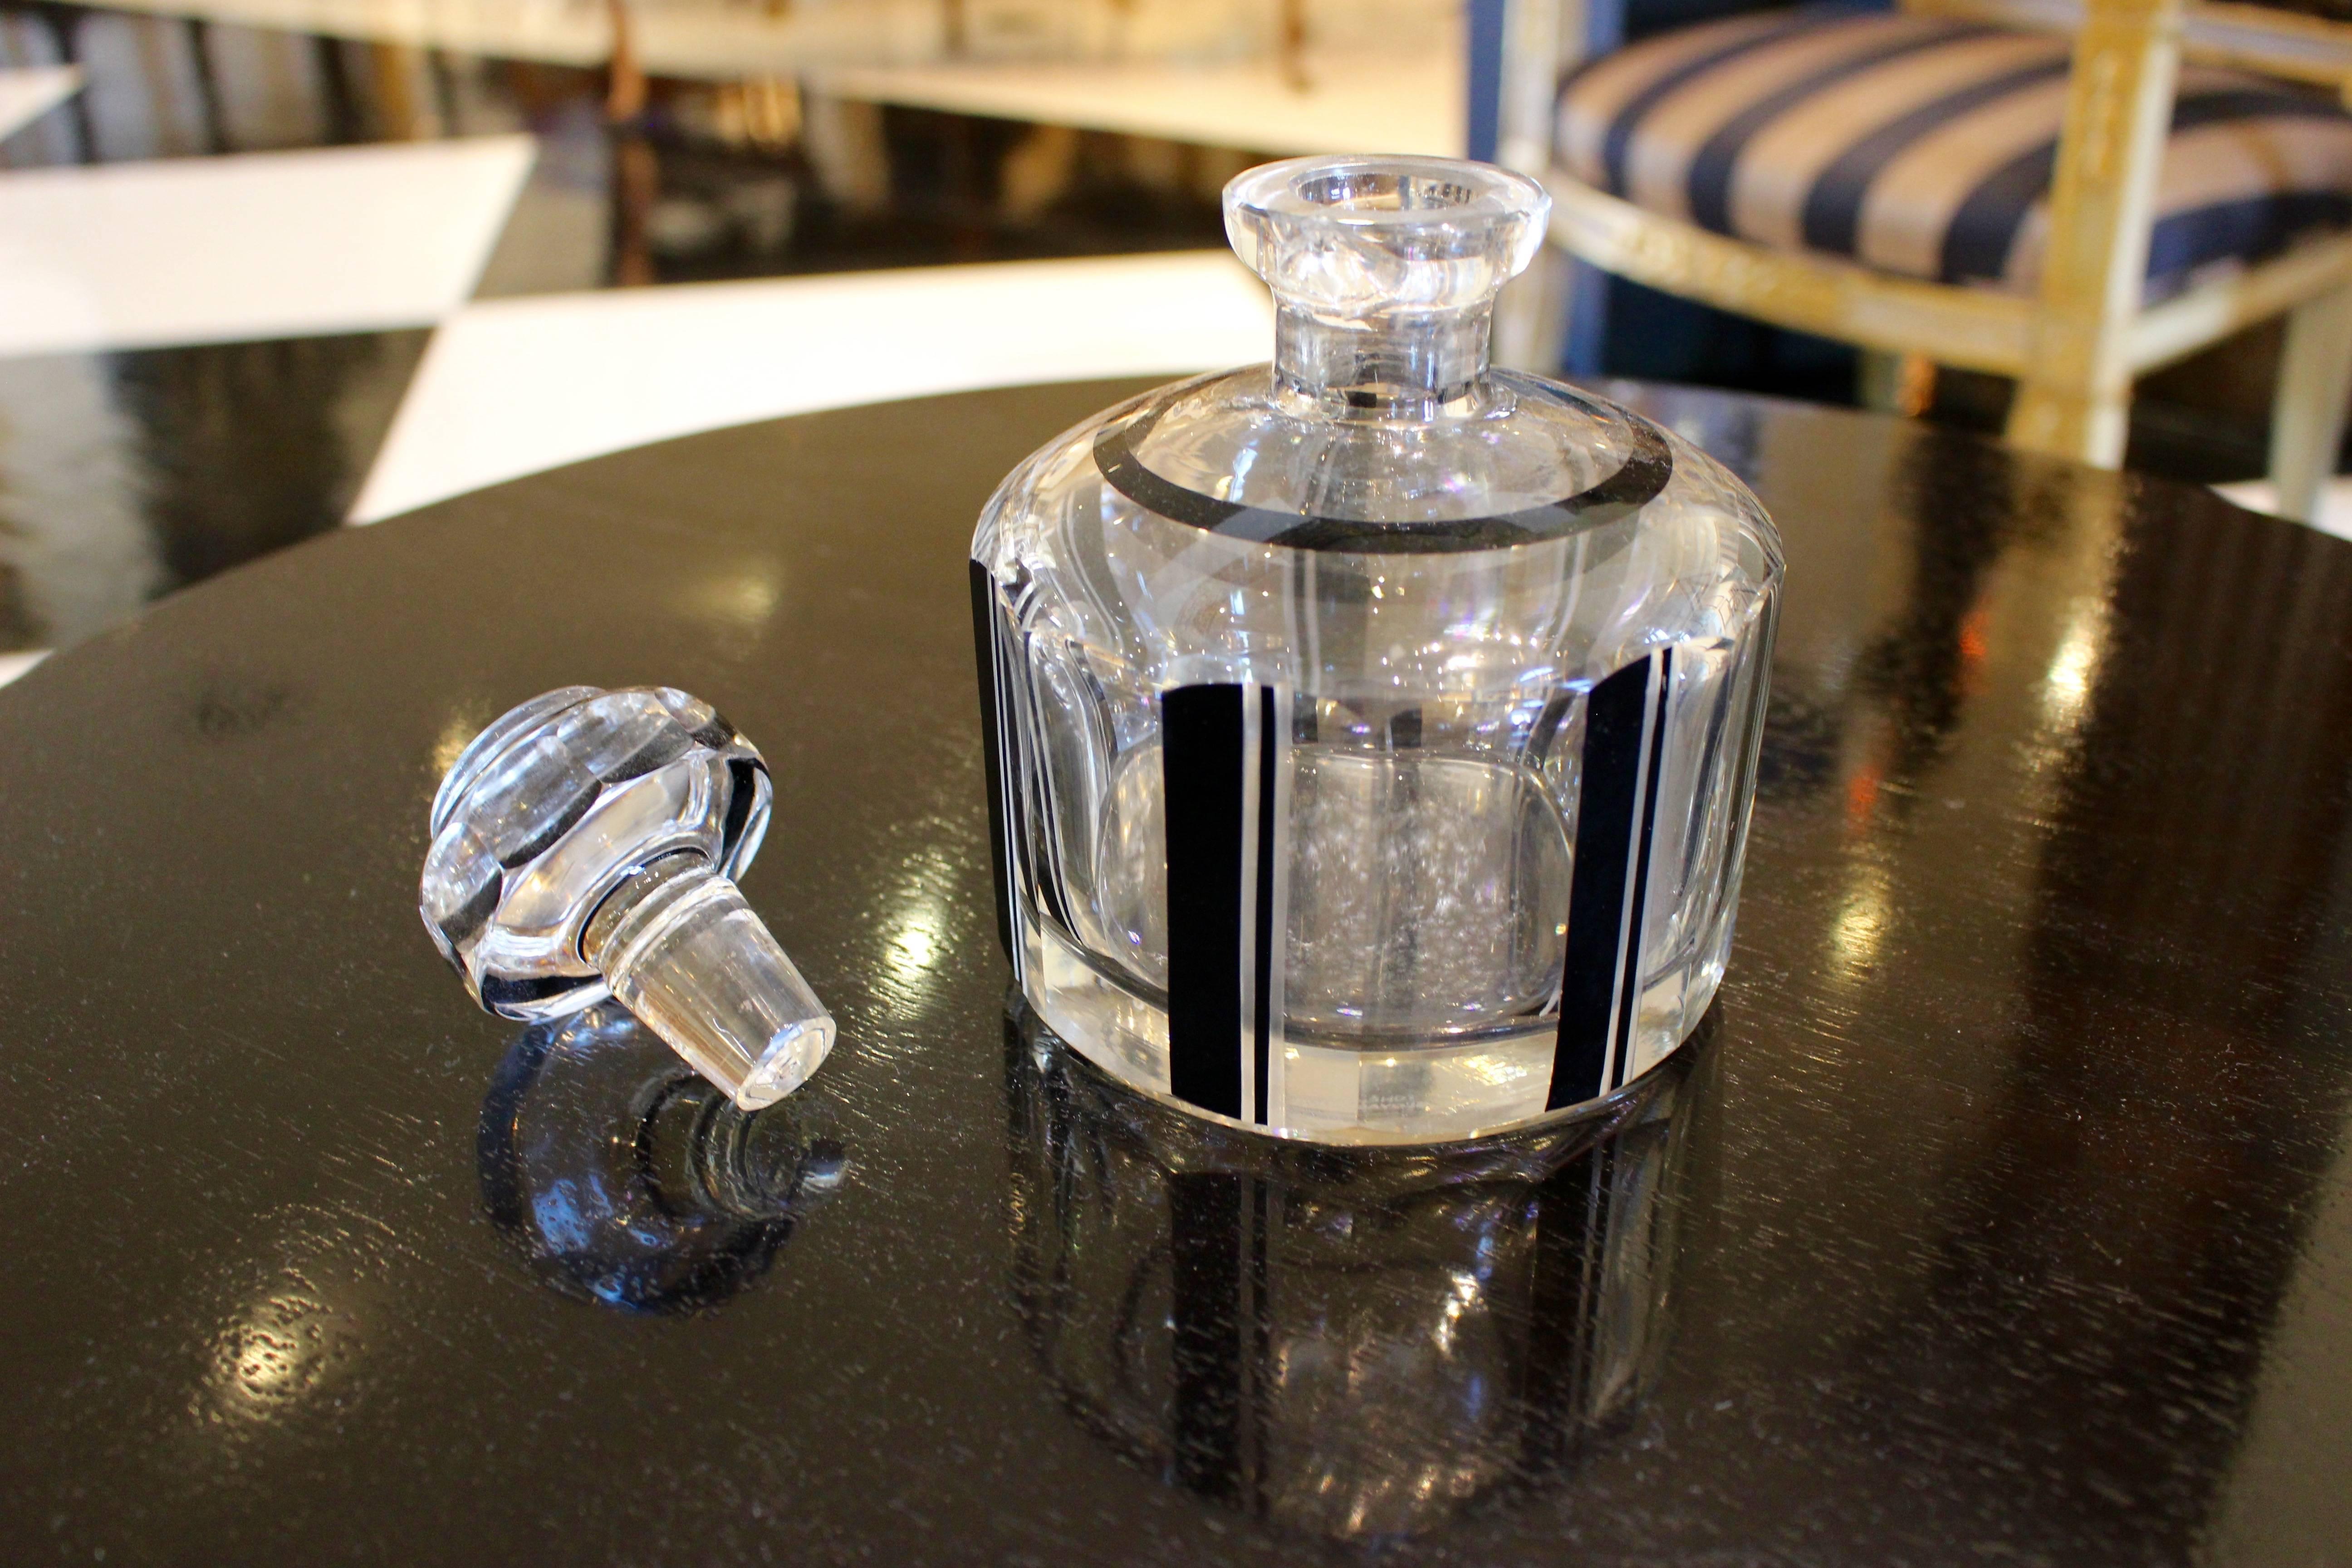 A rare surviving Art Deco round decanter with sleek black and silver accents which were made popular during the early 20th century.